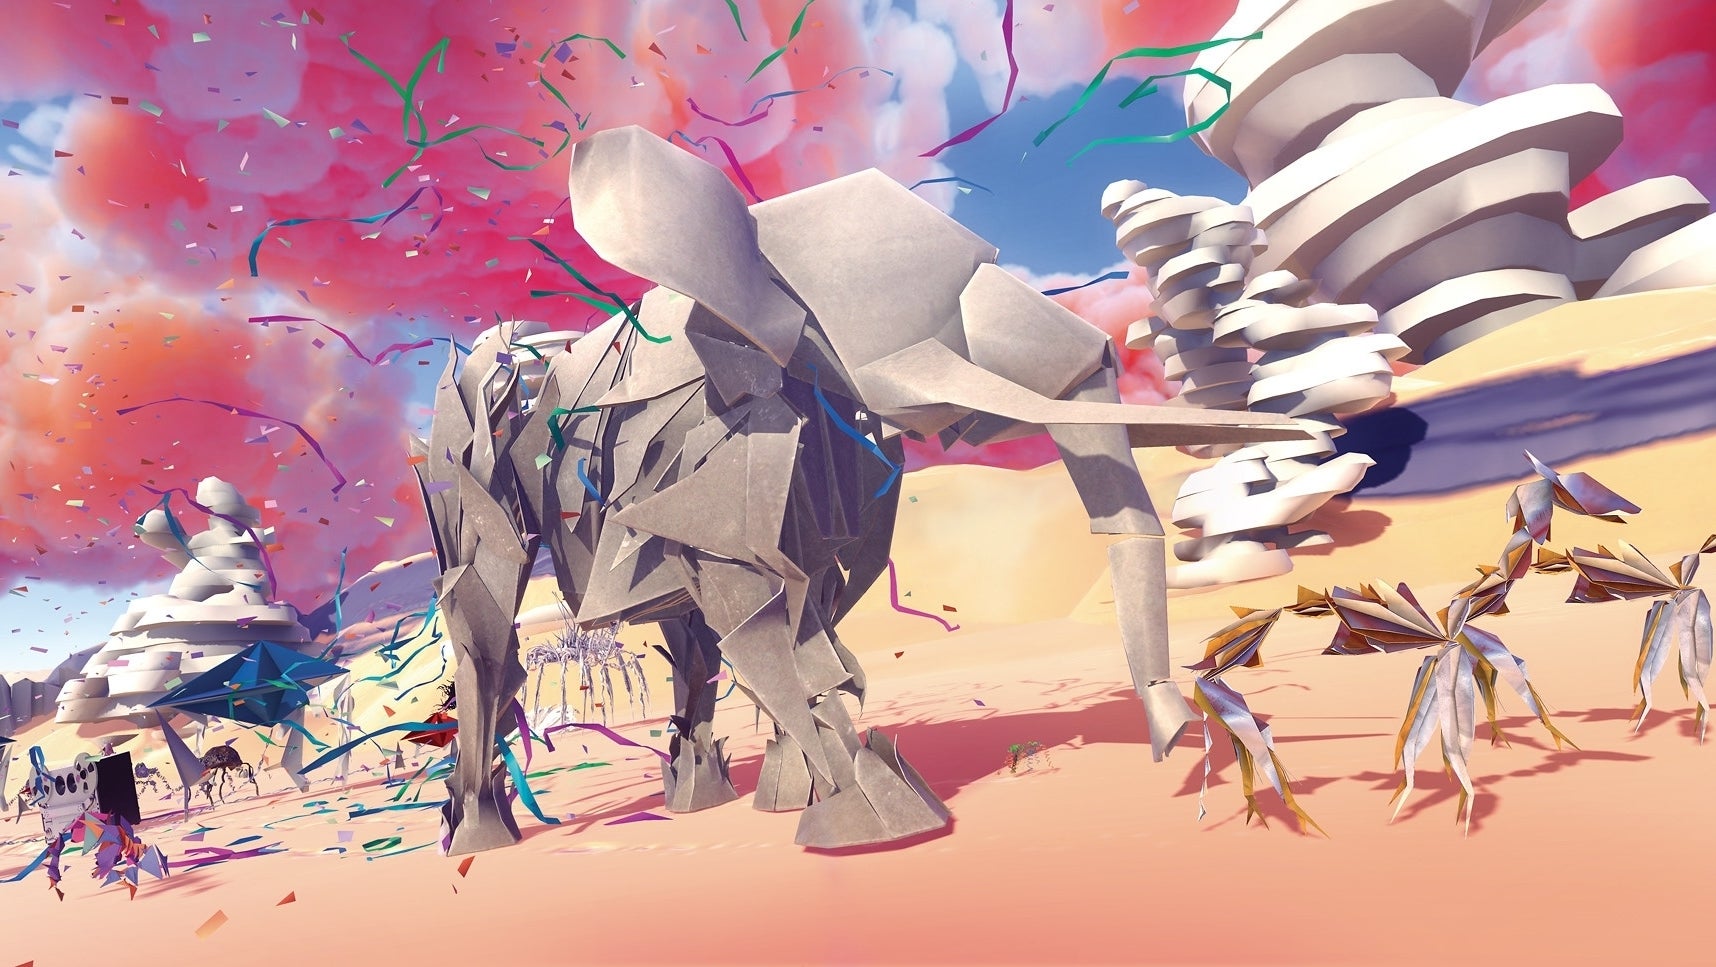 Image for Another World creator's surreal VR ecosystem sim Paper Beast coming to PC this summer